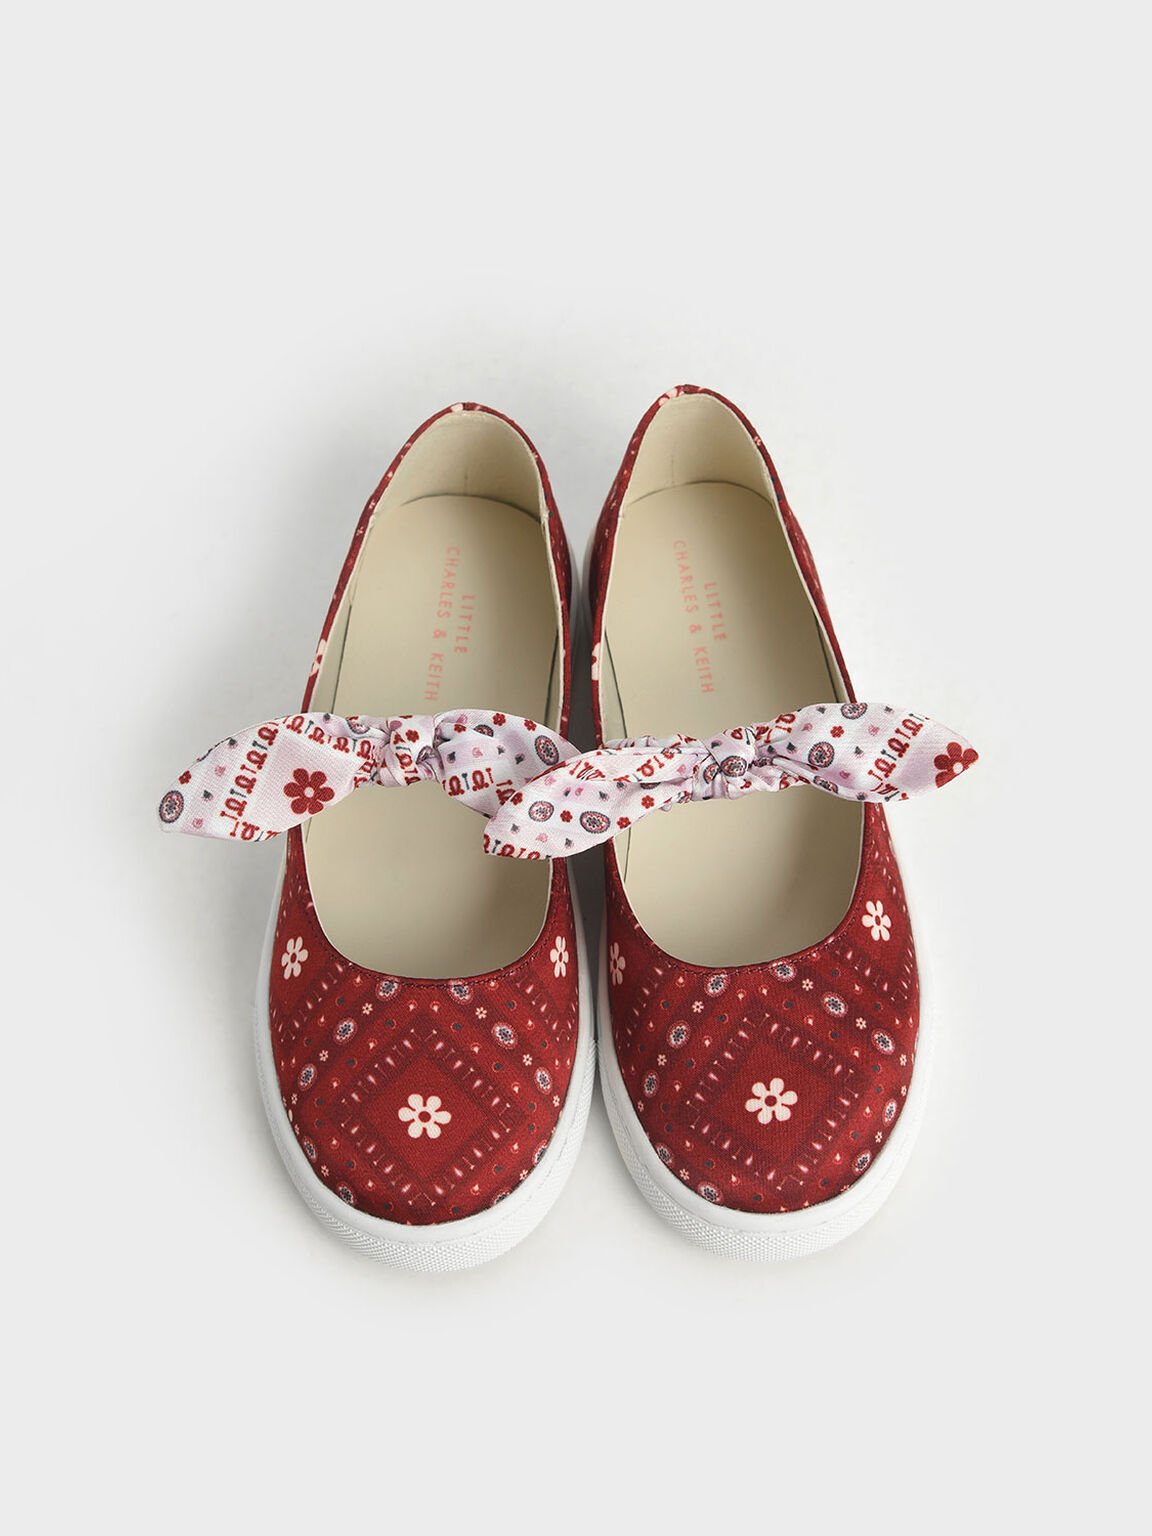 The Purpose Collection - Girls' Bandana Print Slip-On Sneakers, Red, hi-res